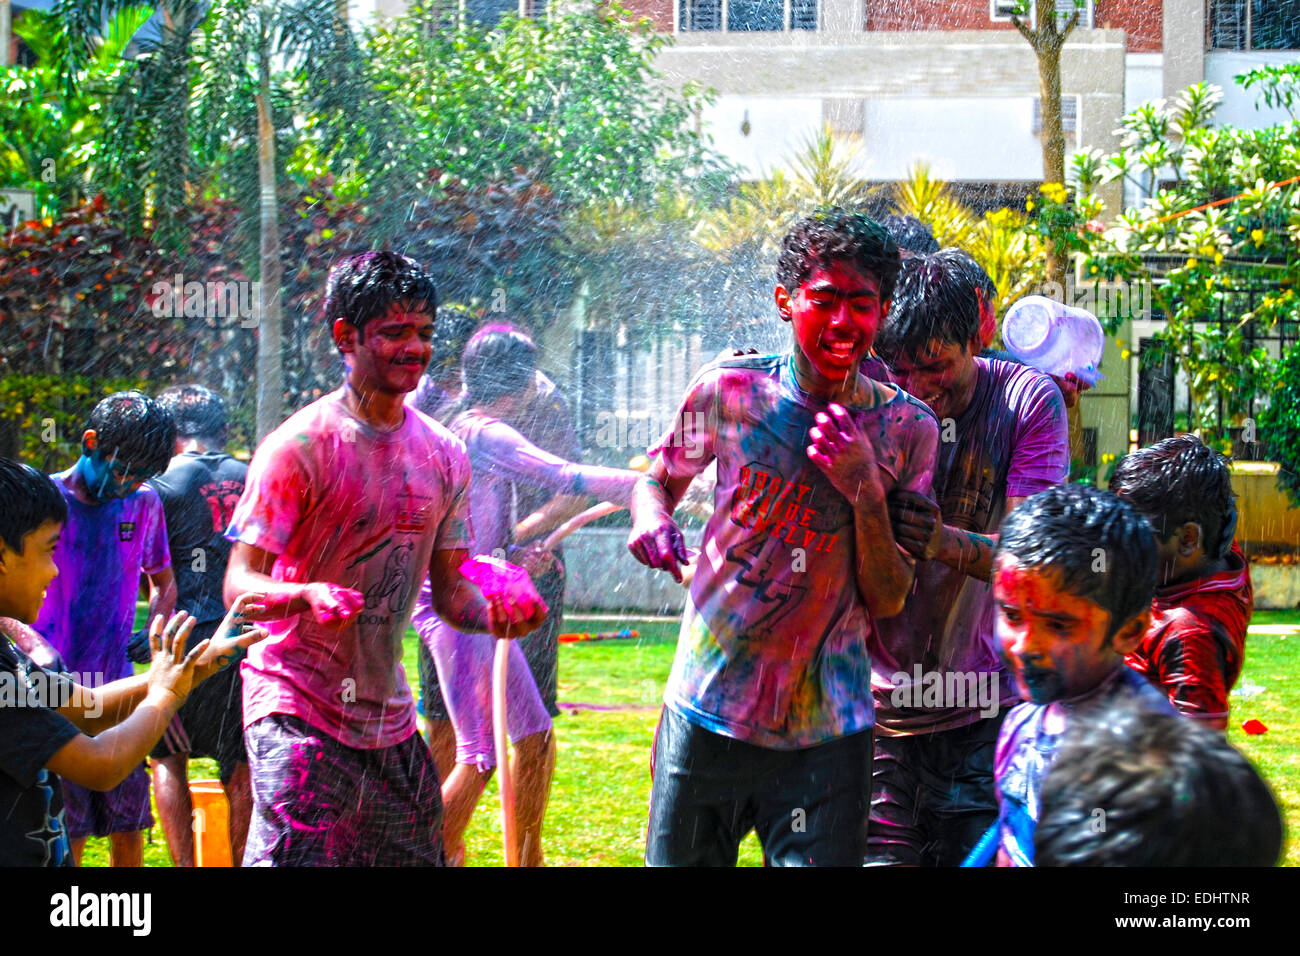 Group of young boys playing with powder colors & water during the spring hindu festival Holi also known as a festival of colors. Stock Photo